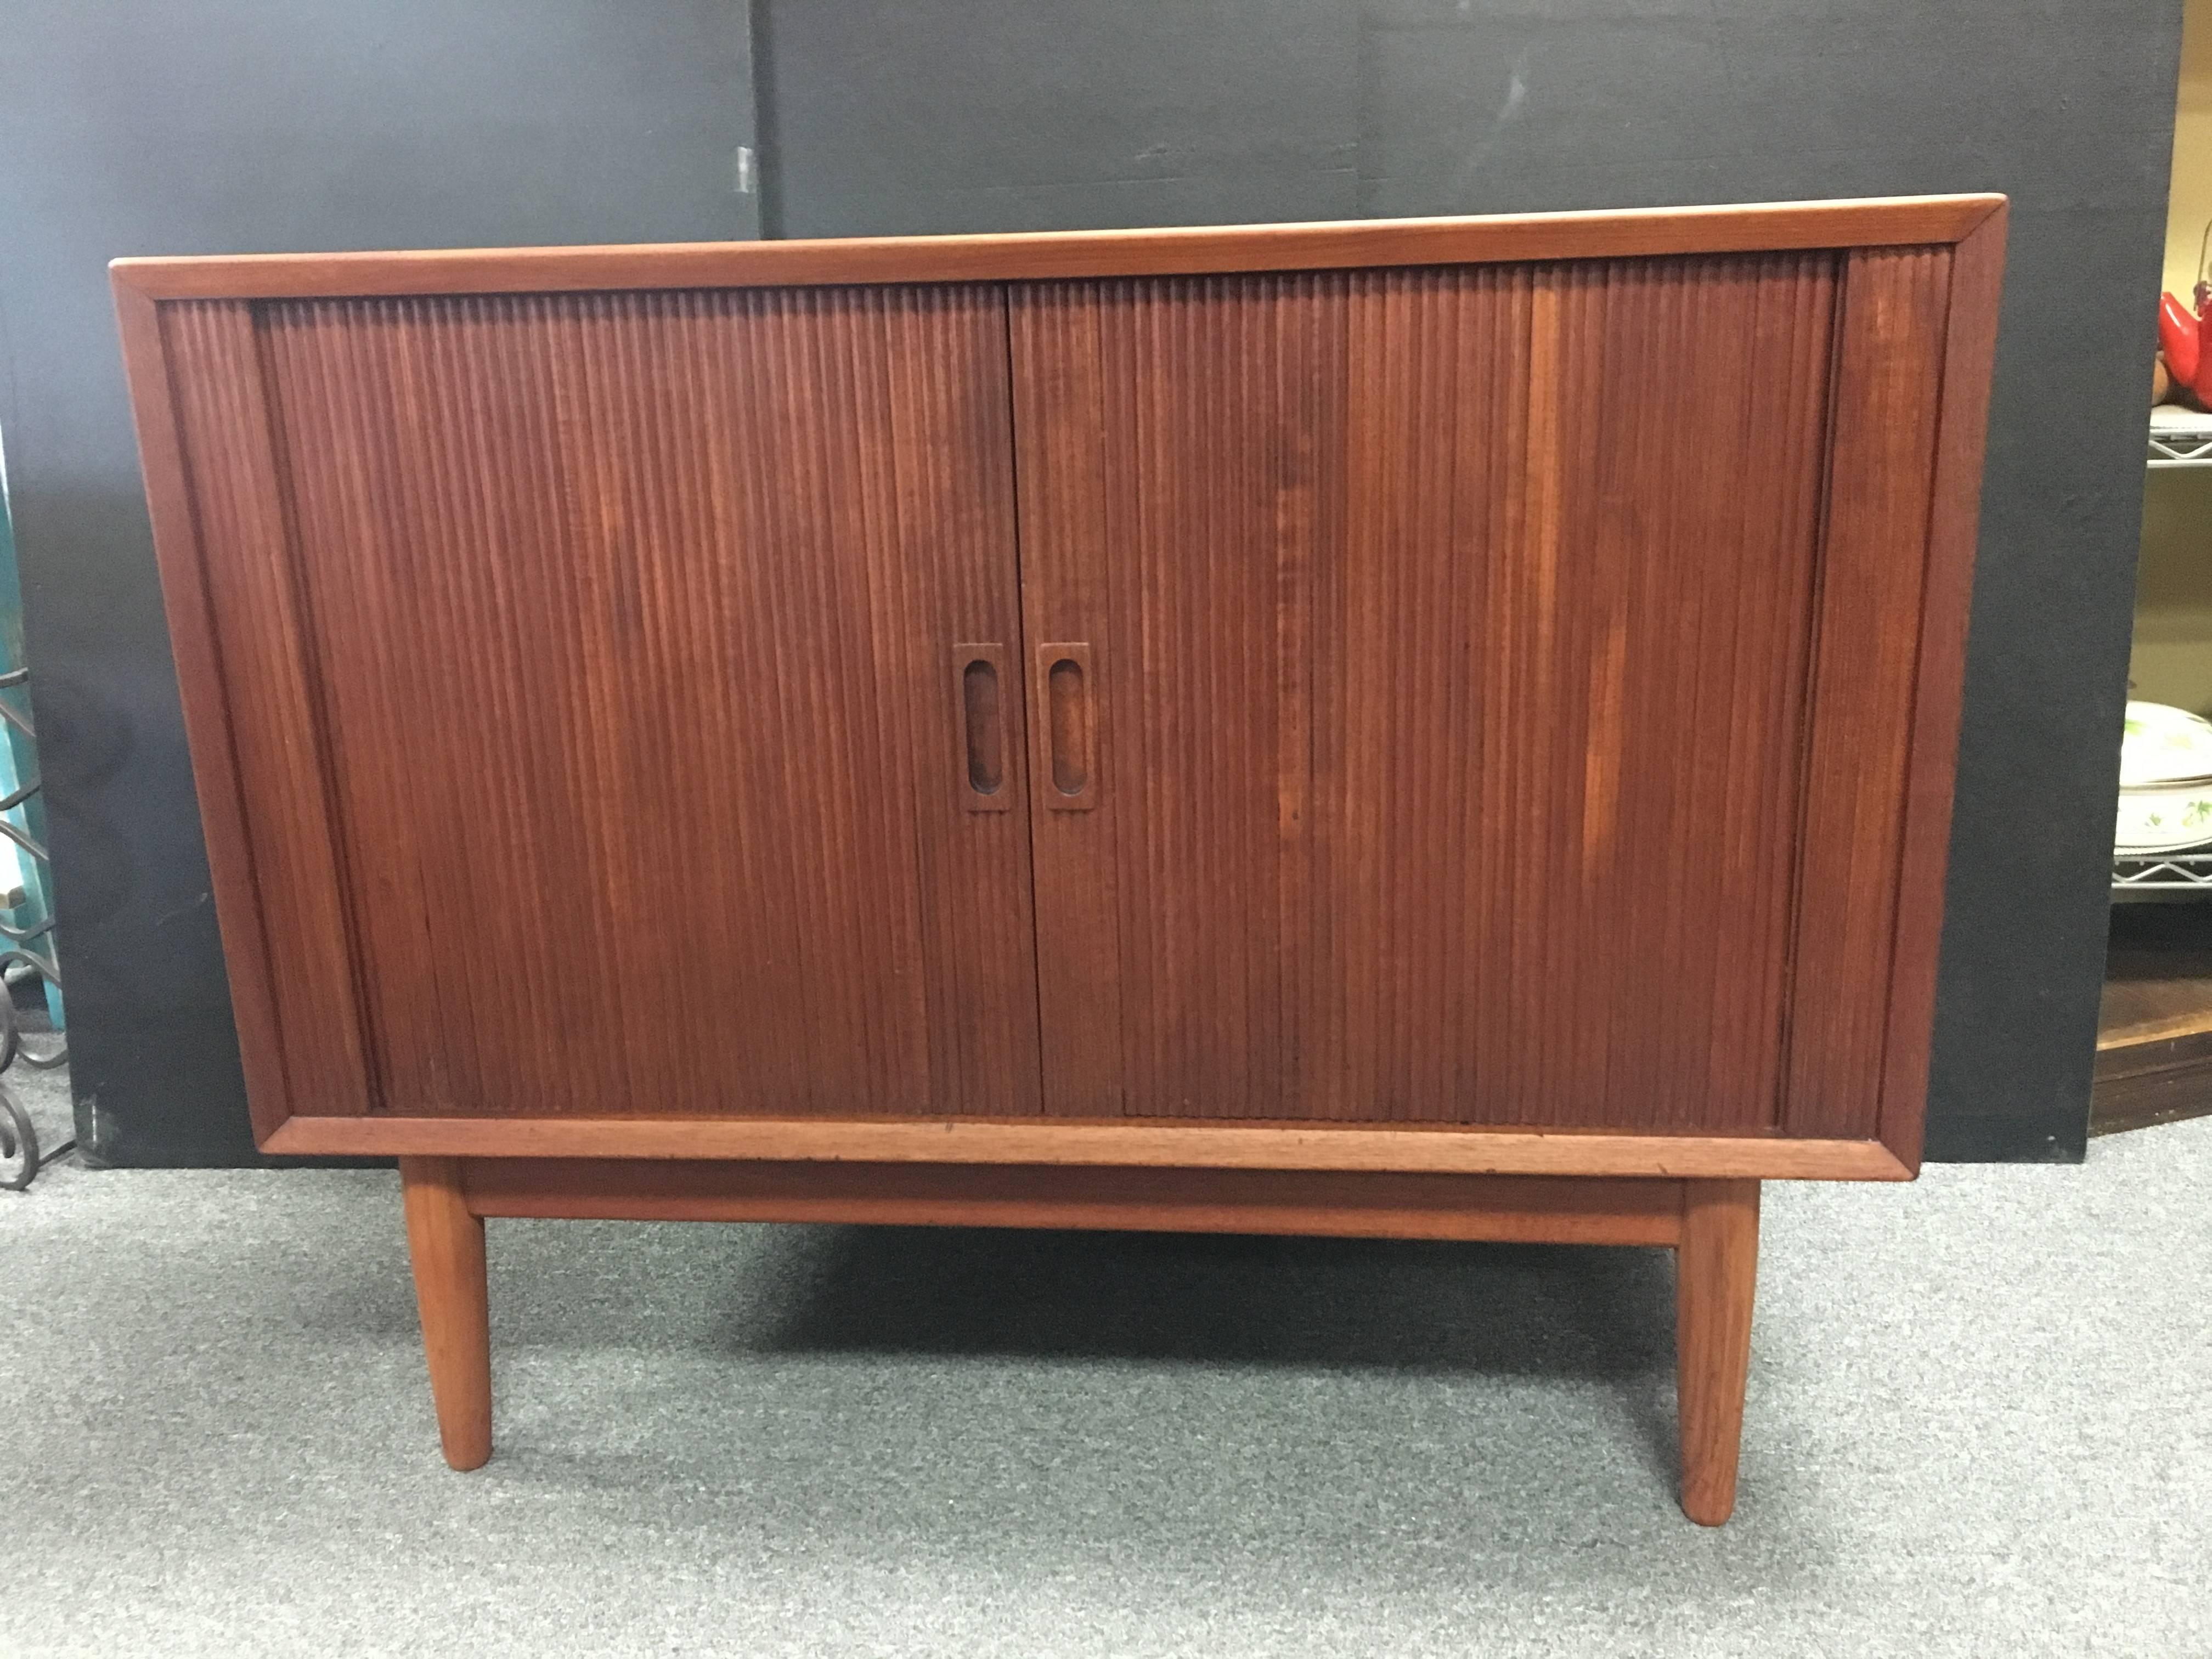 Beautiful and versatile small teak cabinet with tambour doors, a removable inner centre shelf and a finished back. The cabinet has been completely refinished and is in great condition with a couple of small dings. Overall, a wonderful Mid-Century